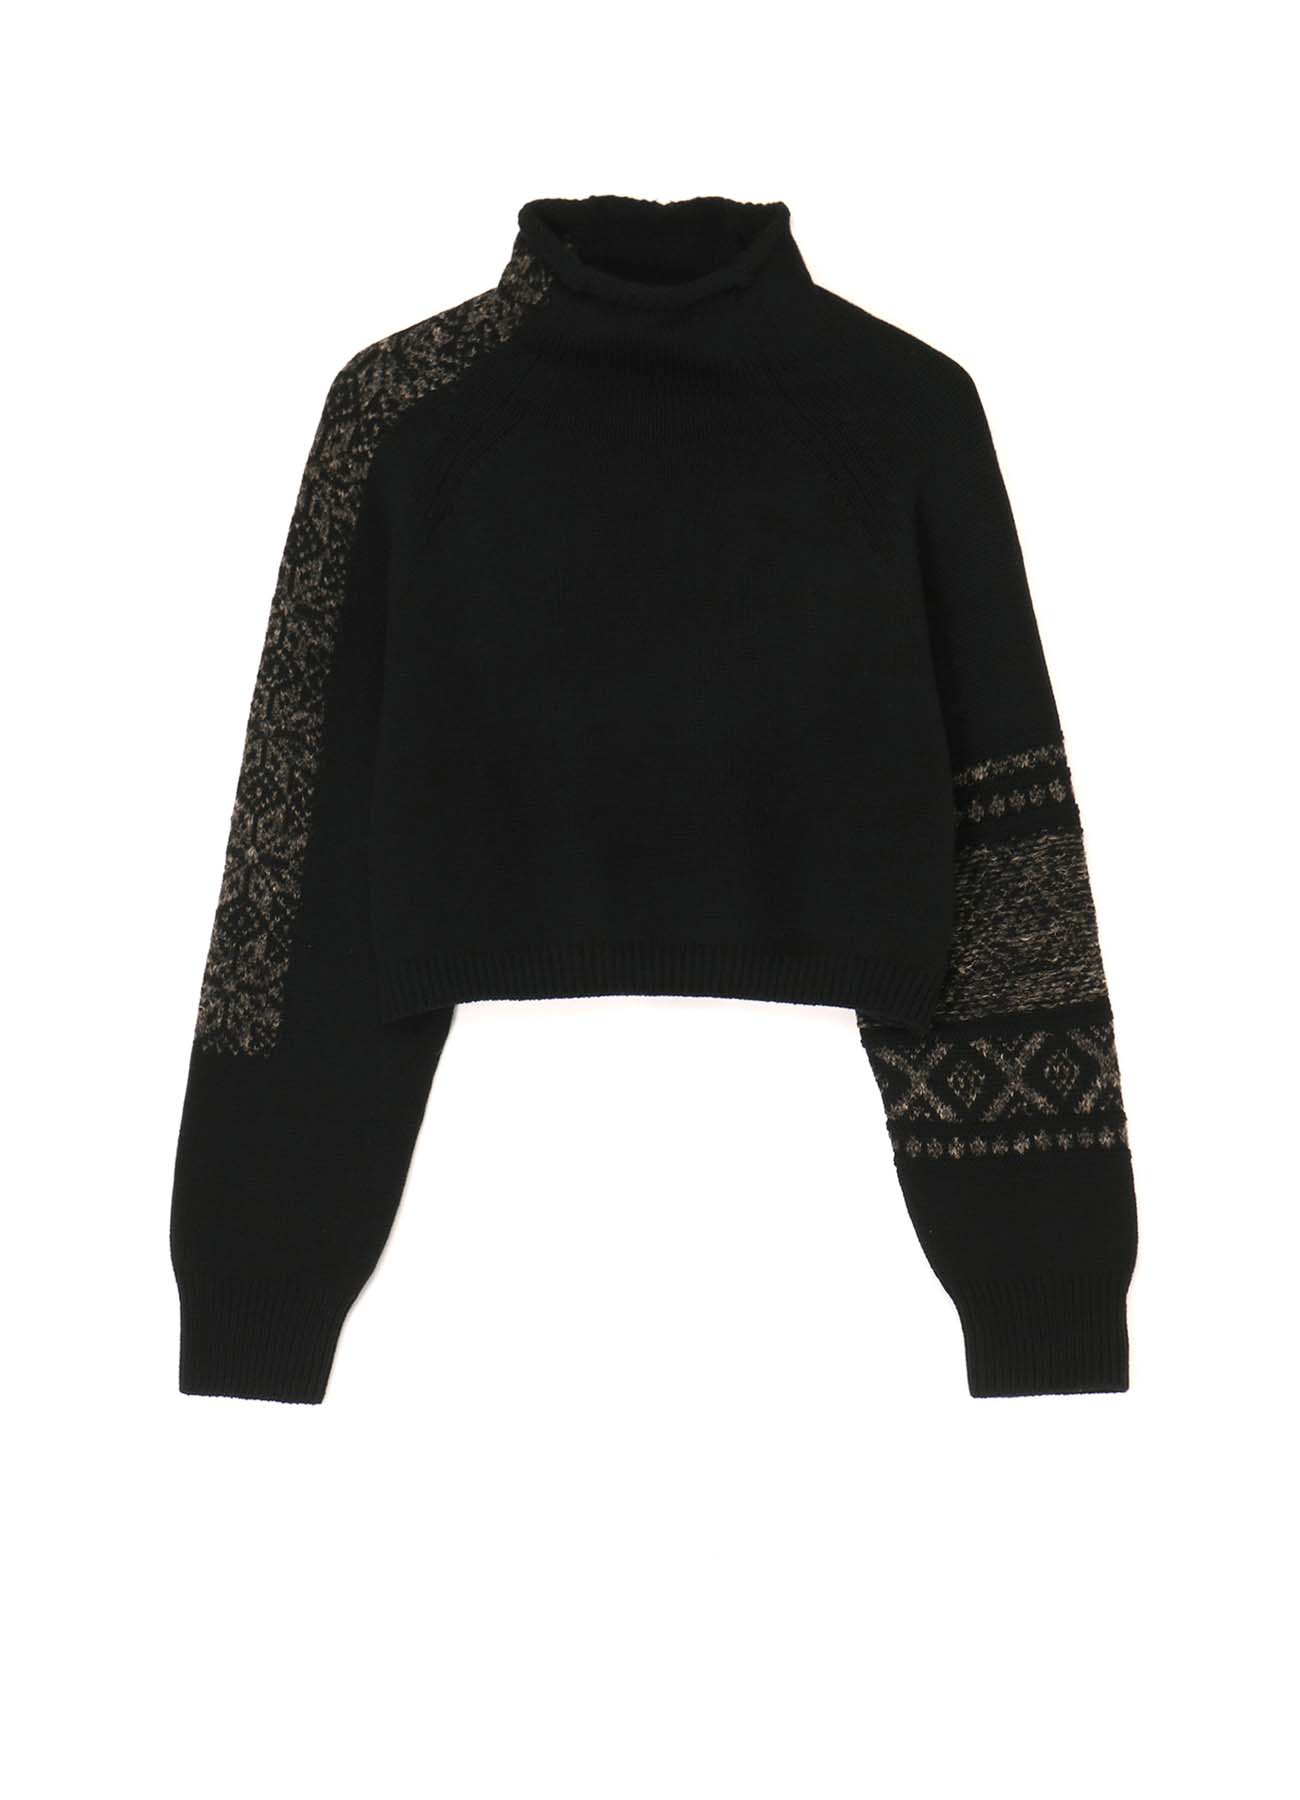 SNOWFLAKE PATTERN CROPPED PULLOVER